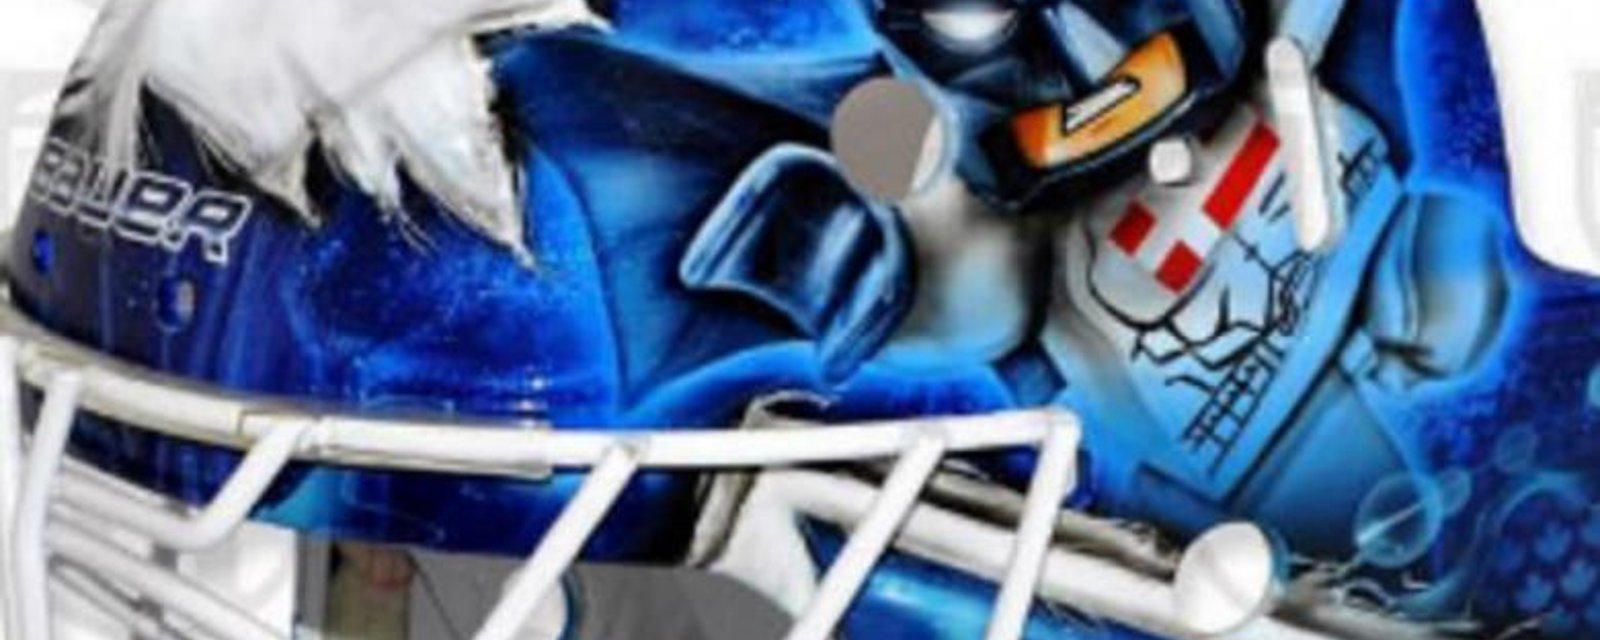 Frederik Andersen's World Cup mask will showcase his new team.